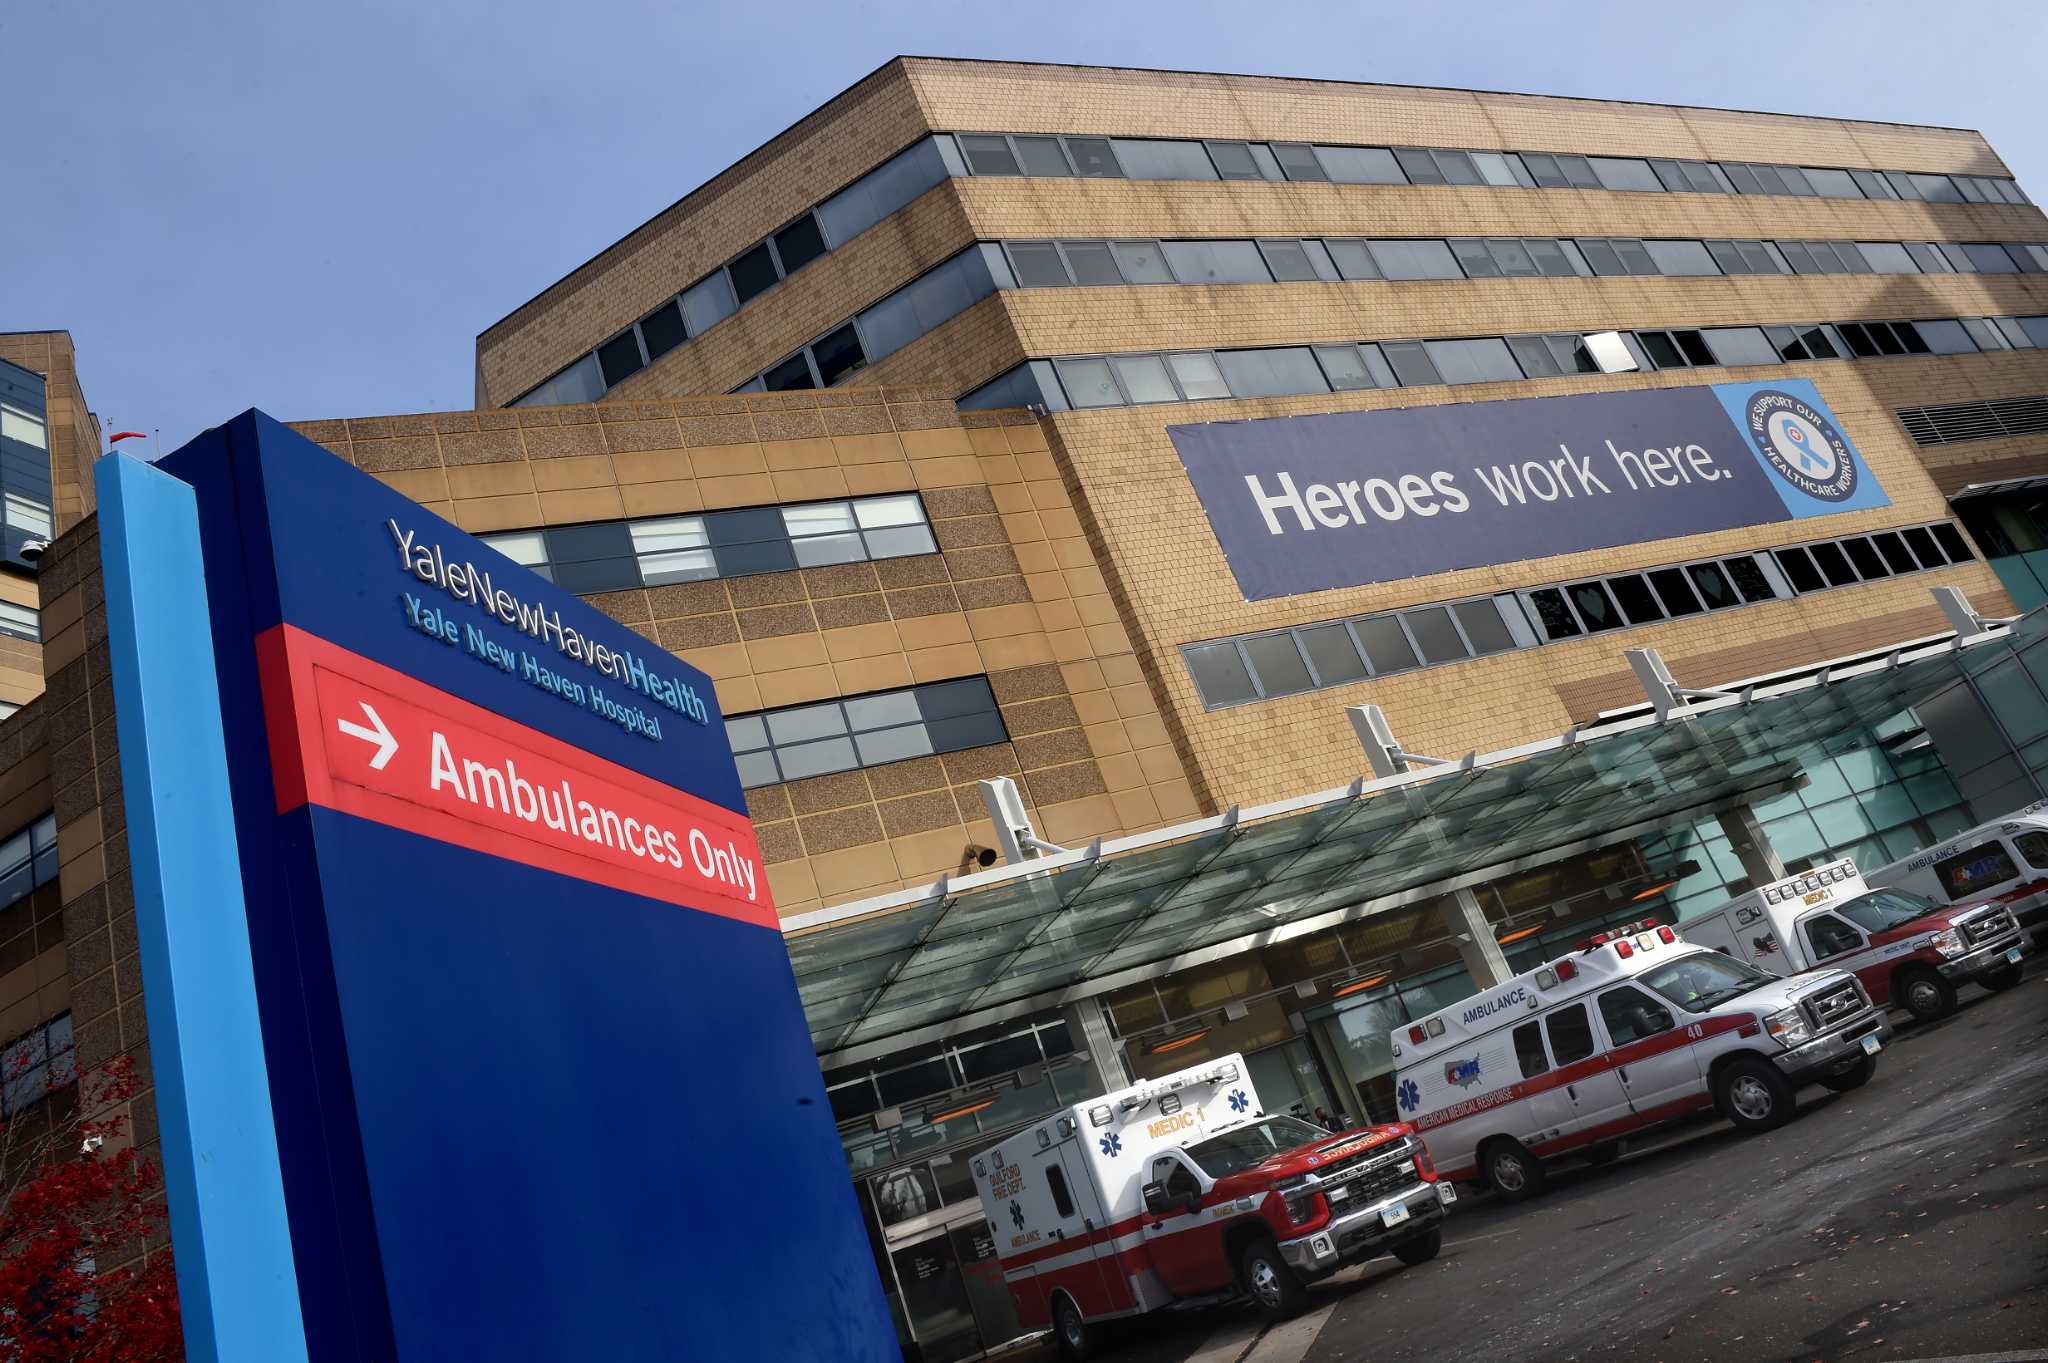 YNHHS still eyes three new hospitals for now, despite loss and job cuts